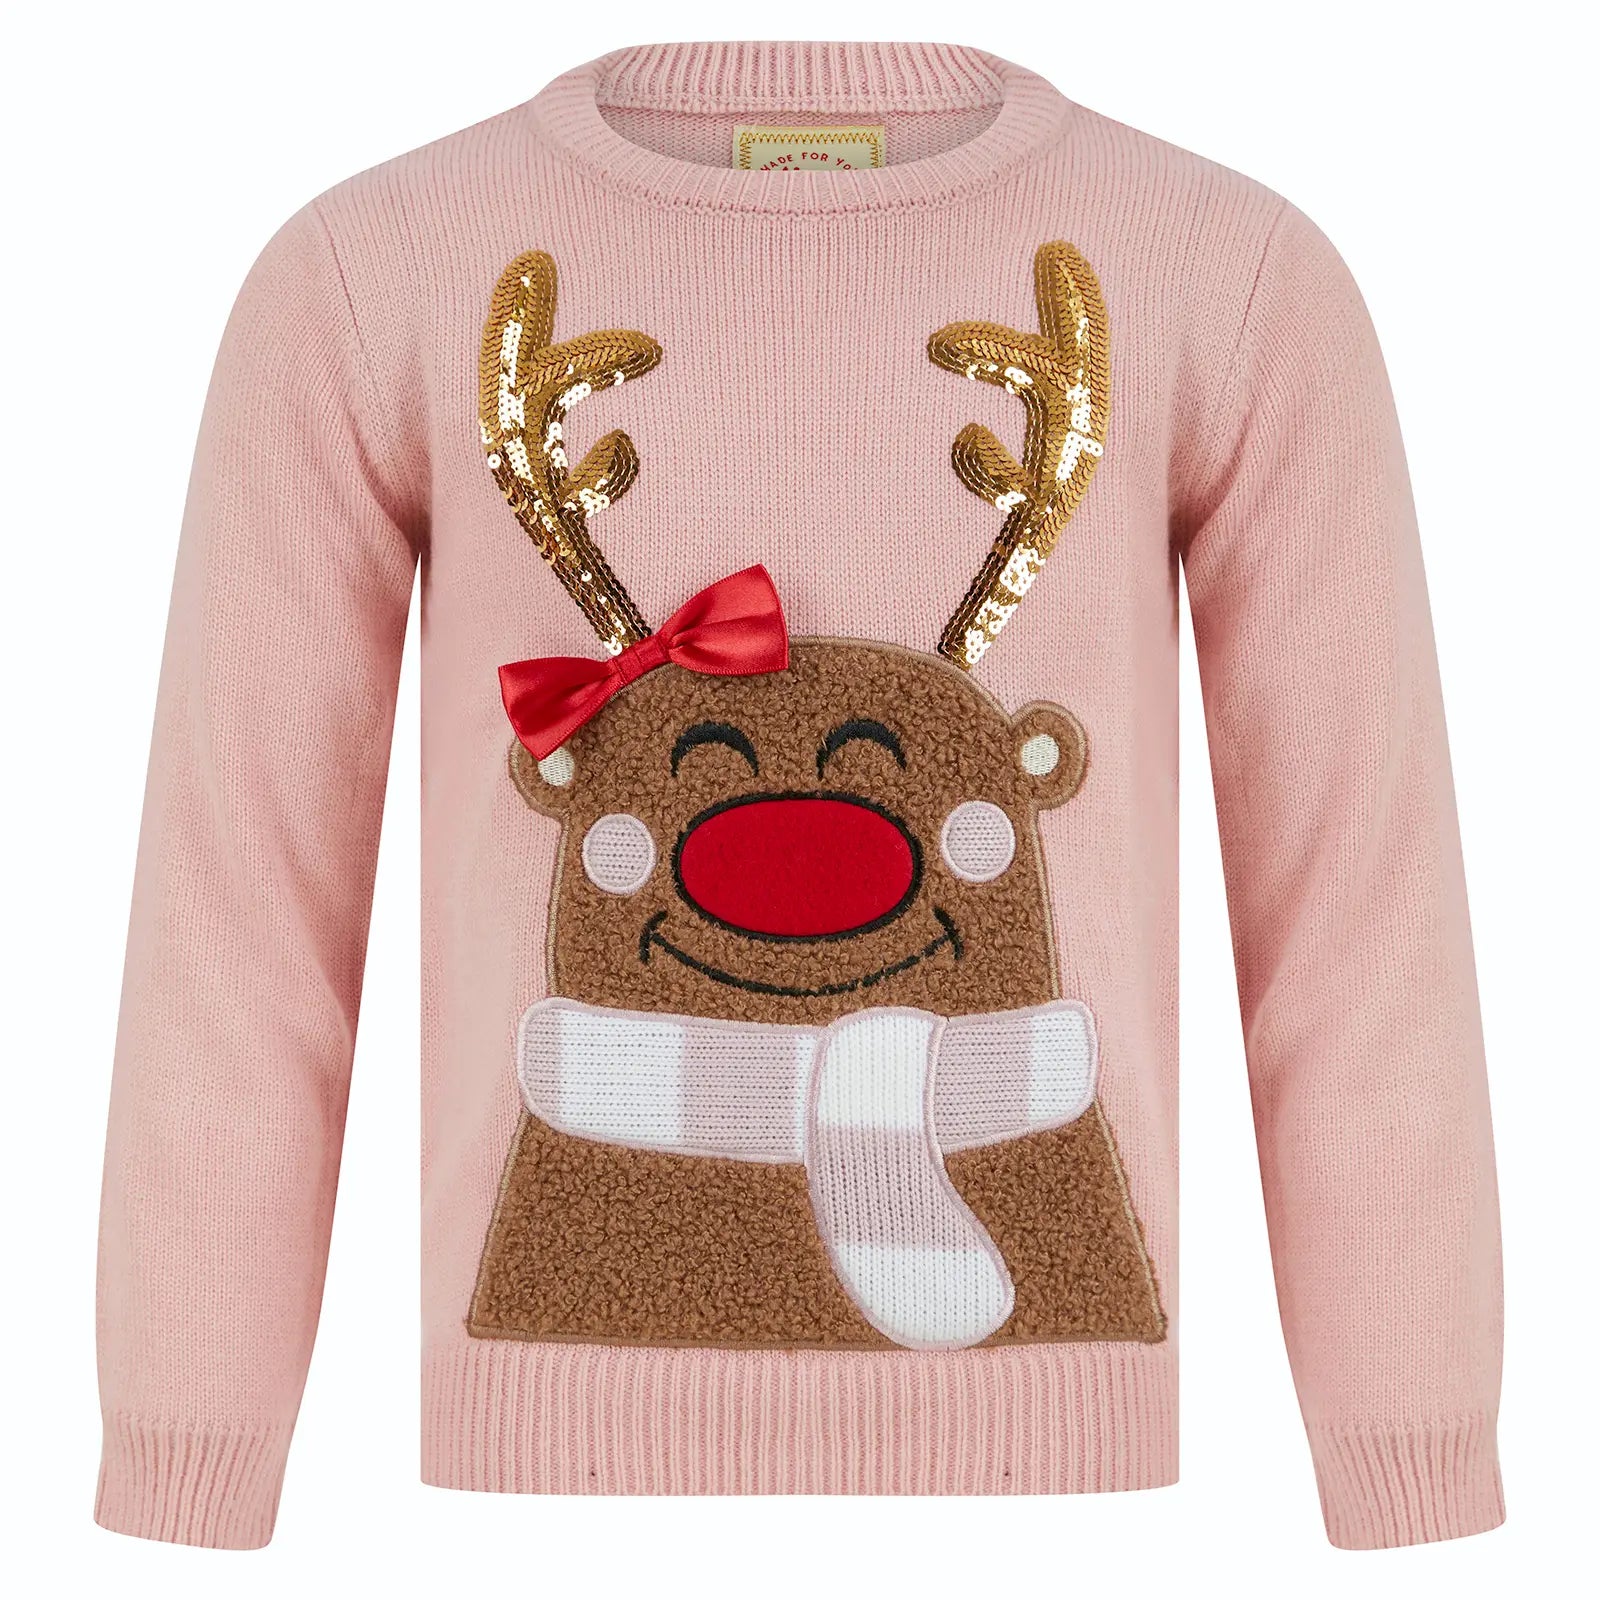 pink coloured christmas jumper featuring sweet reindeer character with gold sequin antlers, red christmas bow and large red nose